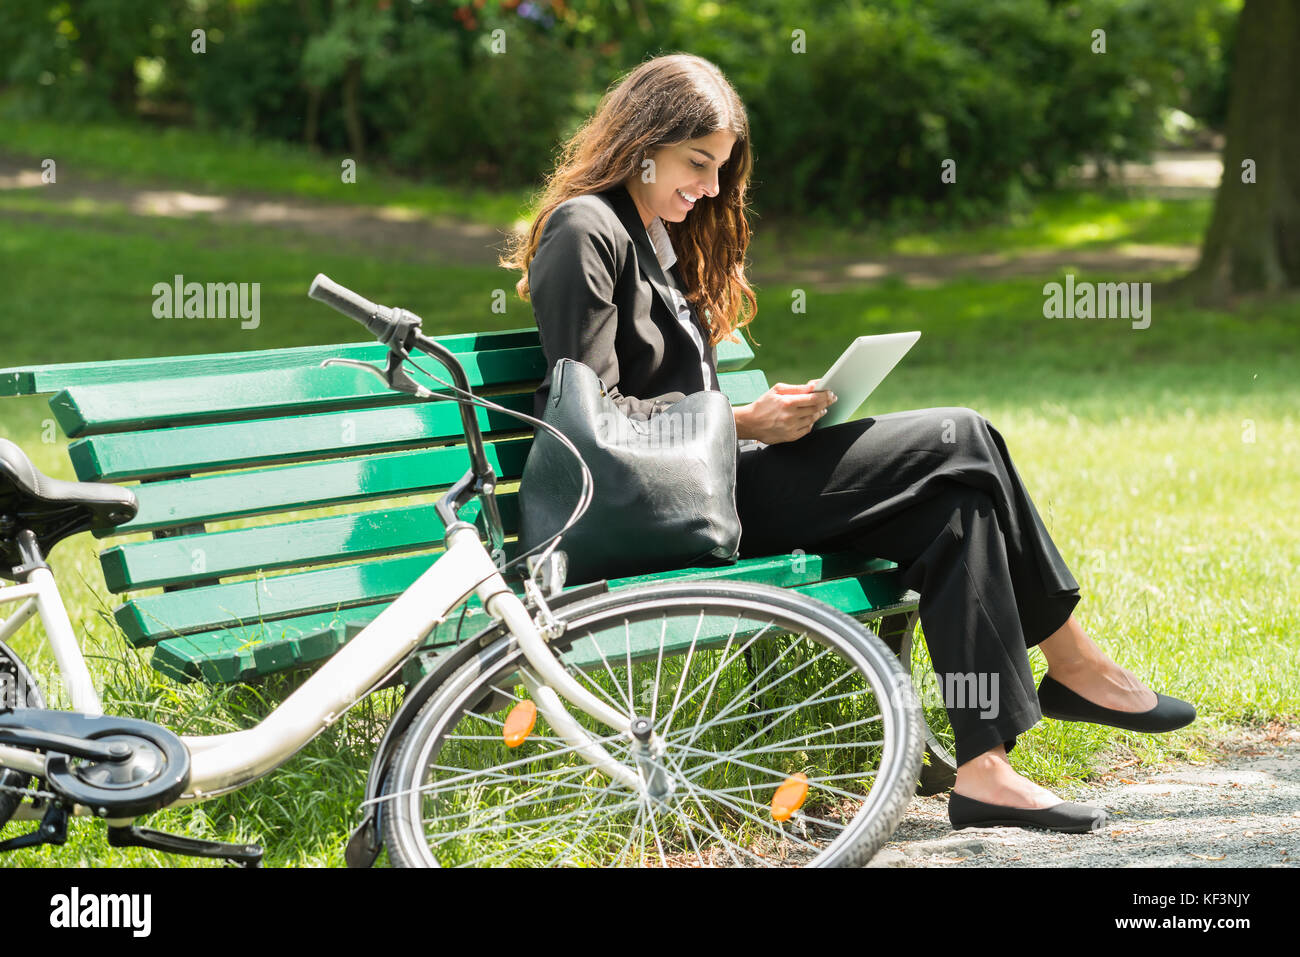 Smiling Young Businesswoman Sitting On Bench Using Digital Tablet At Park Stock Photo